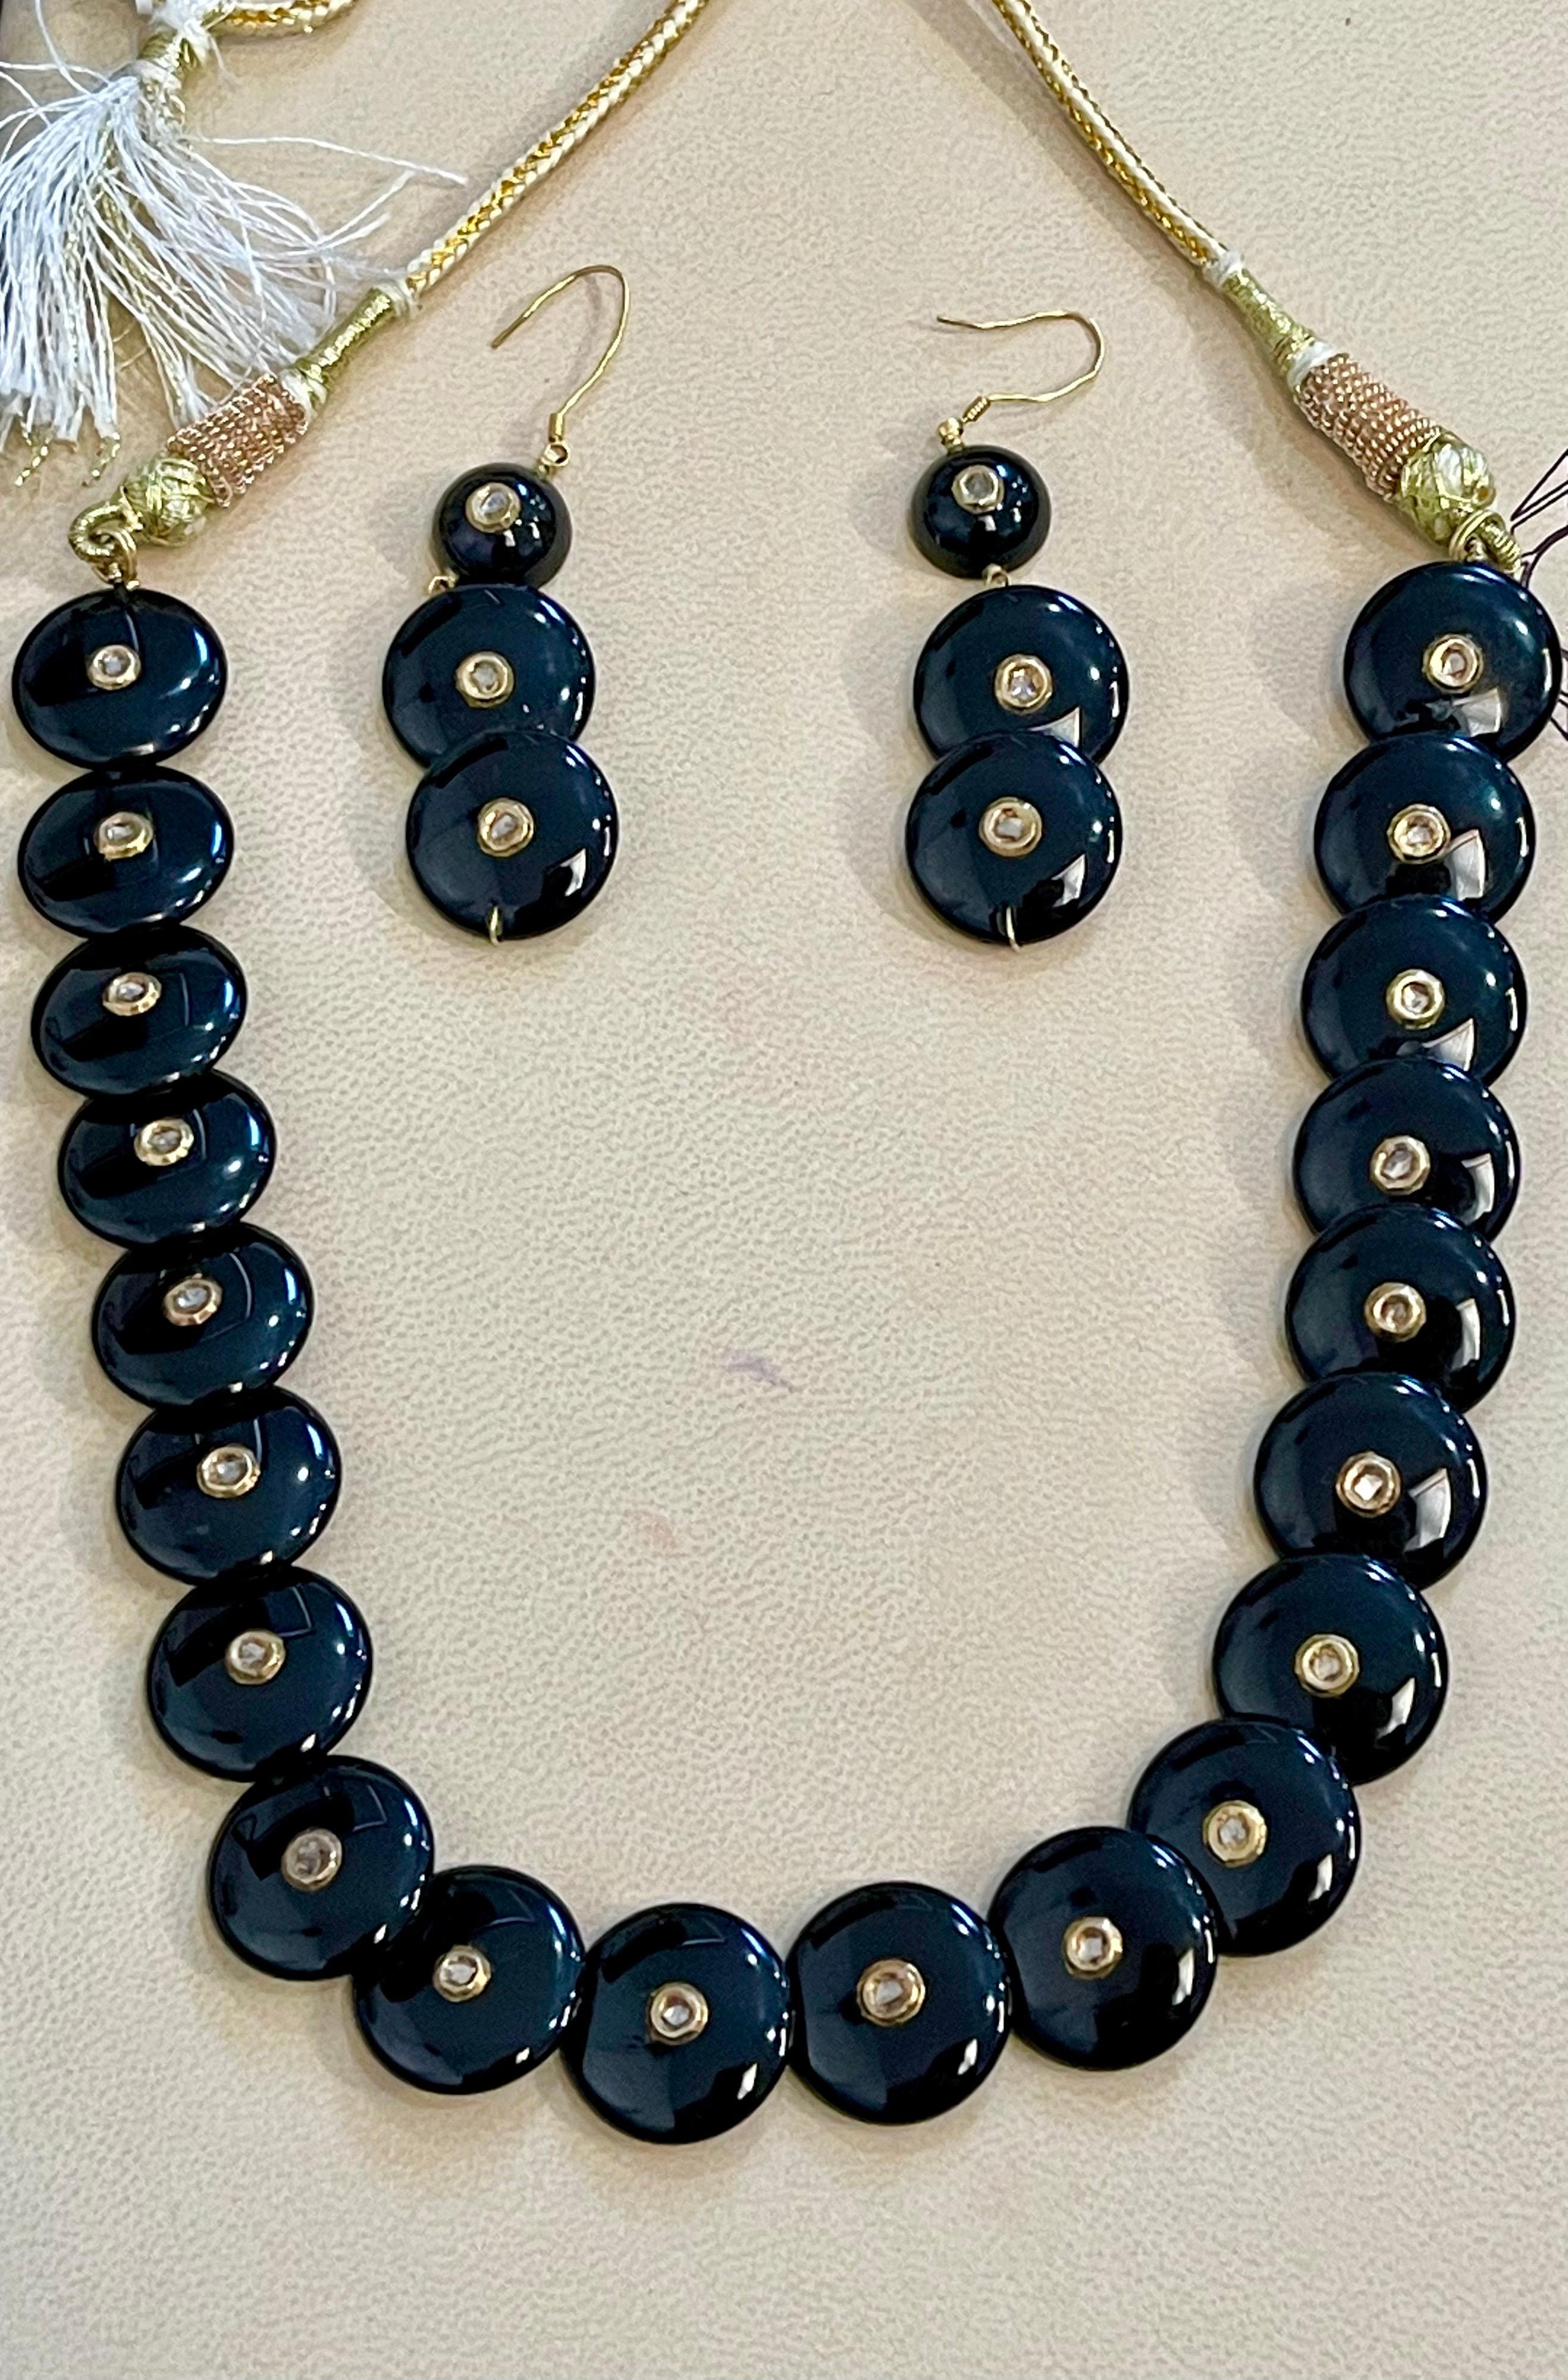 Round Circle Black Onyx with Rose Cut Diamond 18 Karat Gold Necklace, Earrings In Excellent Condition For Sale In New York, NY